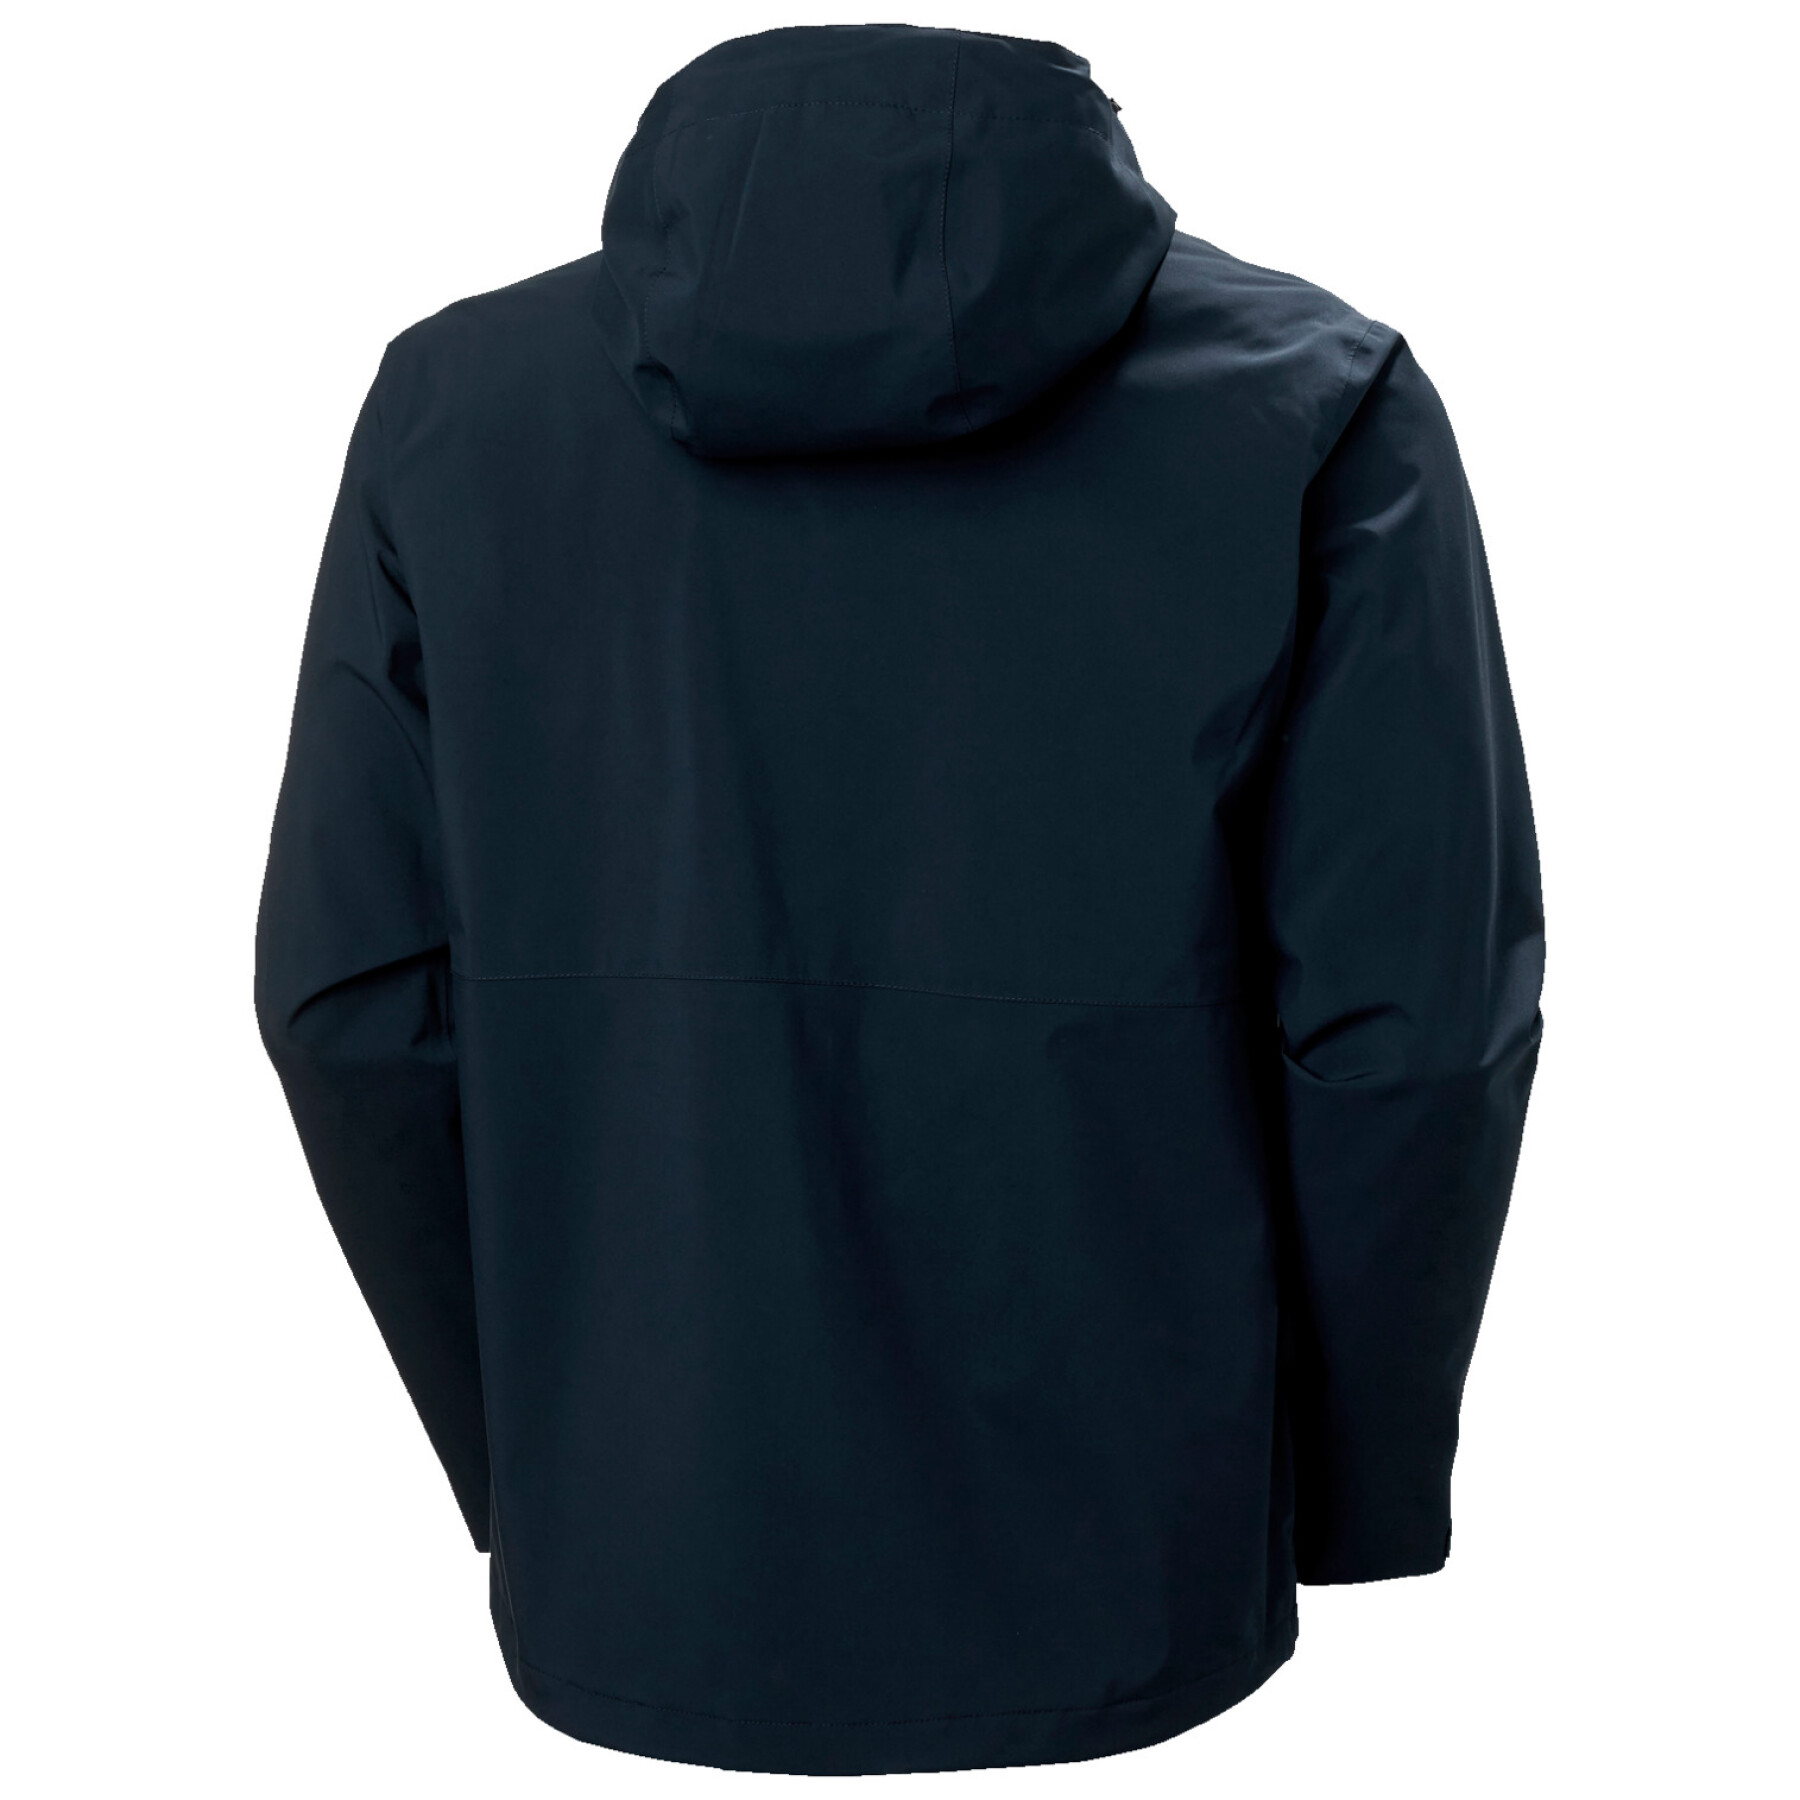 Giacca impermeabile Helly Hansen Juell Storm